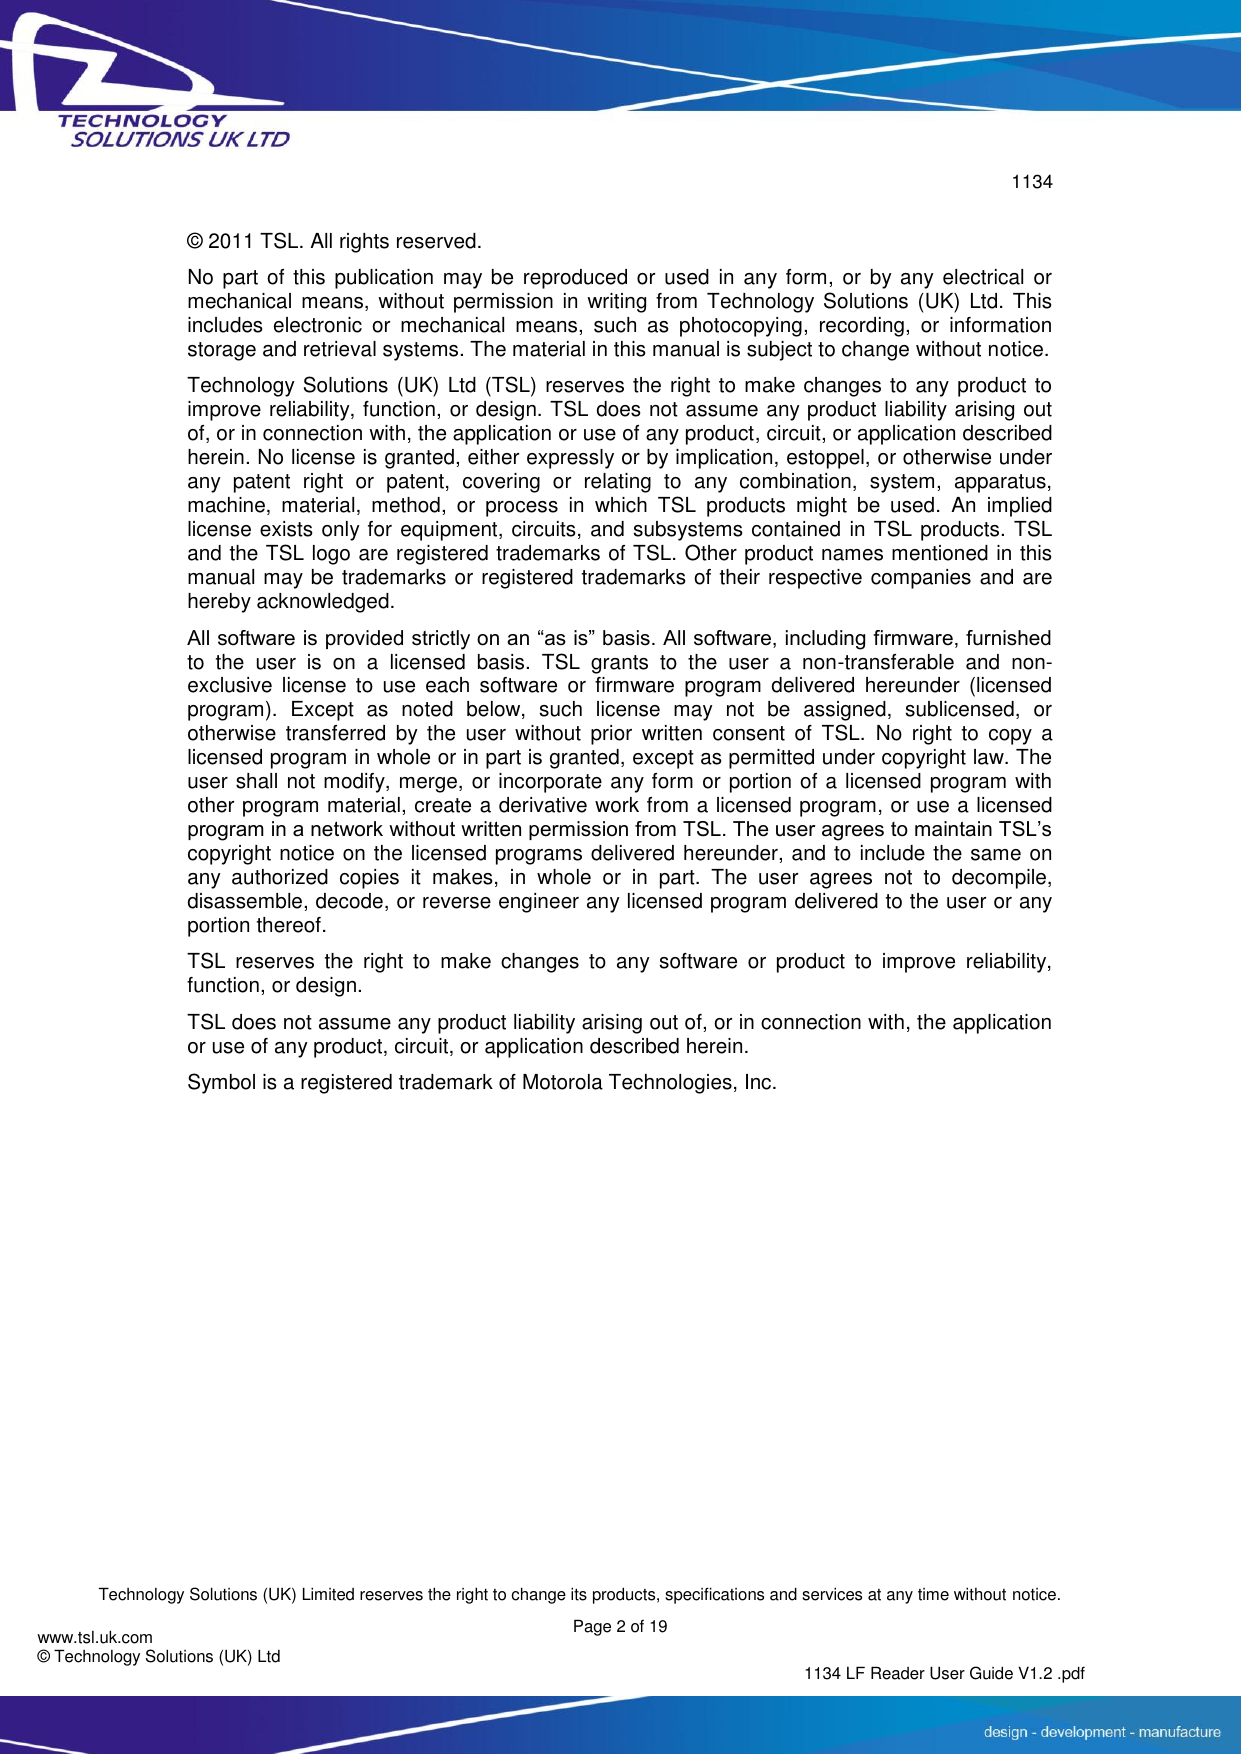        1134  Technology Solutions (UK) Limited reserves the right to change its products, specifications and services at any time without notice.   Page 2 of 19 1134 LF Reader User Guide V1.2 .pdf www.tsl.uk.com © Technology Solutions (UK) Ltd  © 2011 TSL. All rights reserved. No part of  this publication  may be reproduced  or used  in any form,  or  by any electrical or mechanical  means,  without  permission in  writing  from  Technology Solutions (UK) Ltd. This includes  electronic  or  mechanical  means,  such  as  photocopying,  recording,  or  information storage and retrieval systems. The material in this manual is subject to change without notice. Technology Solutions (UK) Ltd (TSL) reserves the right to make changes to any product to improve reliability, function, or design. TSL does not assume any product liability arising out of, or in connection with, the application or use of any product, circuit, or application described herein. No license is granted, either expressly or by implication, estoppel, or otherwise under any  patent  right  or  patent,  covering  or  relating  to  any  combination,  system,  apparatus, machine,  material,  method,  or  process  in  which  TSL  products  might  be  used.  An  implied license exists only for equipment, circuits, and subsystems contained in TSL products. TSL and the TSL logo are registered trademarks of TSL. Other product names mentioned in this manual may be trademarks or registered trademarks of their respective companies and are hereby acknowledged. All software is provided strictly on an “as is” basis. All software, including firmware, furnished to  the  user  is  on  a  licensed  basis.  TSL  grants  to  the  user  a  non-transferable  and  non-exclusive  license  to  use  each  software  or  firmware  program  delivered  hereunder  (licensed program).  Except  as  noted  below,  such  license  may  not  be  assigned,  sublicensed,  or otherwise  transferred  by  the  user  without  prior  written  consent  of  TSL.  No  right  to  copy  a licensed program in whole or in part is granted, except as permitted under copyright law. The user shall not modify, merge, or incorporate any form or portion of a licensed program with other program material, create a derivative work from a licensed program, or use a licensed program in a network without written permission from TSL. The user agrees to maintain TSL’s copyright notice on the licensed programs delivered hereunder, and to include the same on any  authorized  copies  it  makes,  in  whole  or  in  part.  The  user  agrees  not  to  decompile, disassemble, decode, or reverse engineer any licensed program delivered to the user or any portion thereof. TSL  reserves  the  right  to  make  changes  to  any  software  or  product  to  improve  reliability, function, or design. TSL does not assume any product liability arising out of, or in connection with, the application or use of any product, circuit, or application described herein. Symbol is a registered trademark of Motorola Technologies, Inc.  